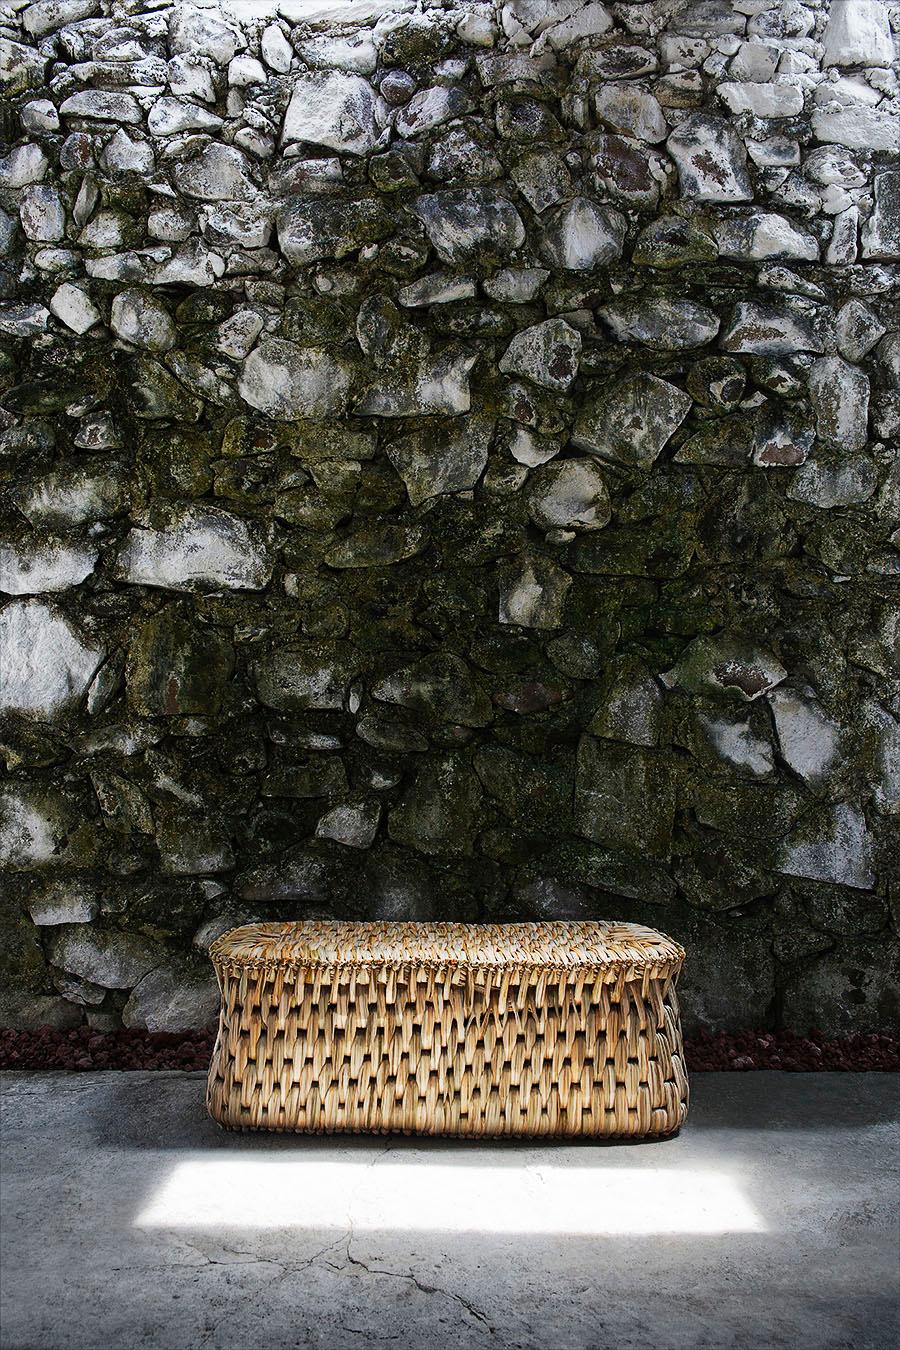 Woven Tule 'Icpalli' Bench made in Mexico from LUTECA (Volkskunst)